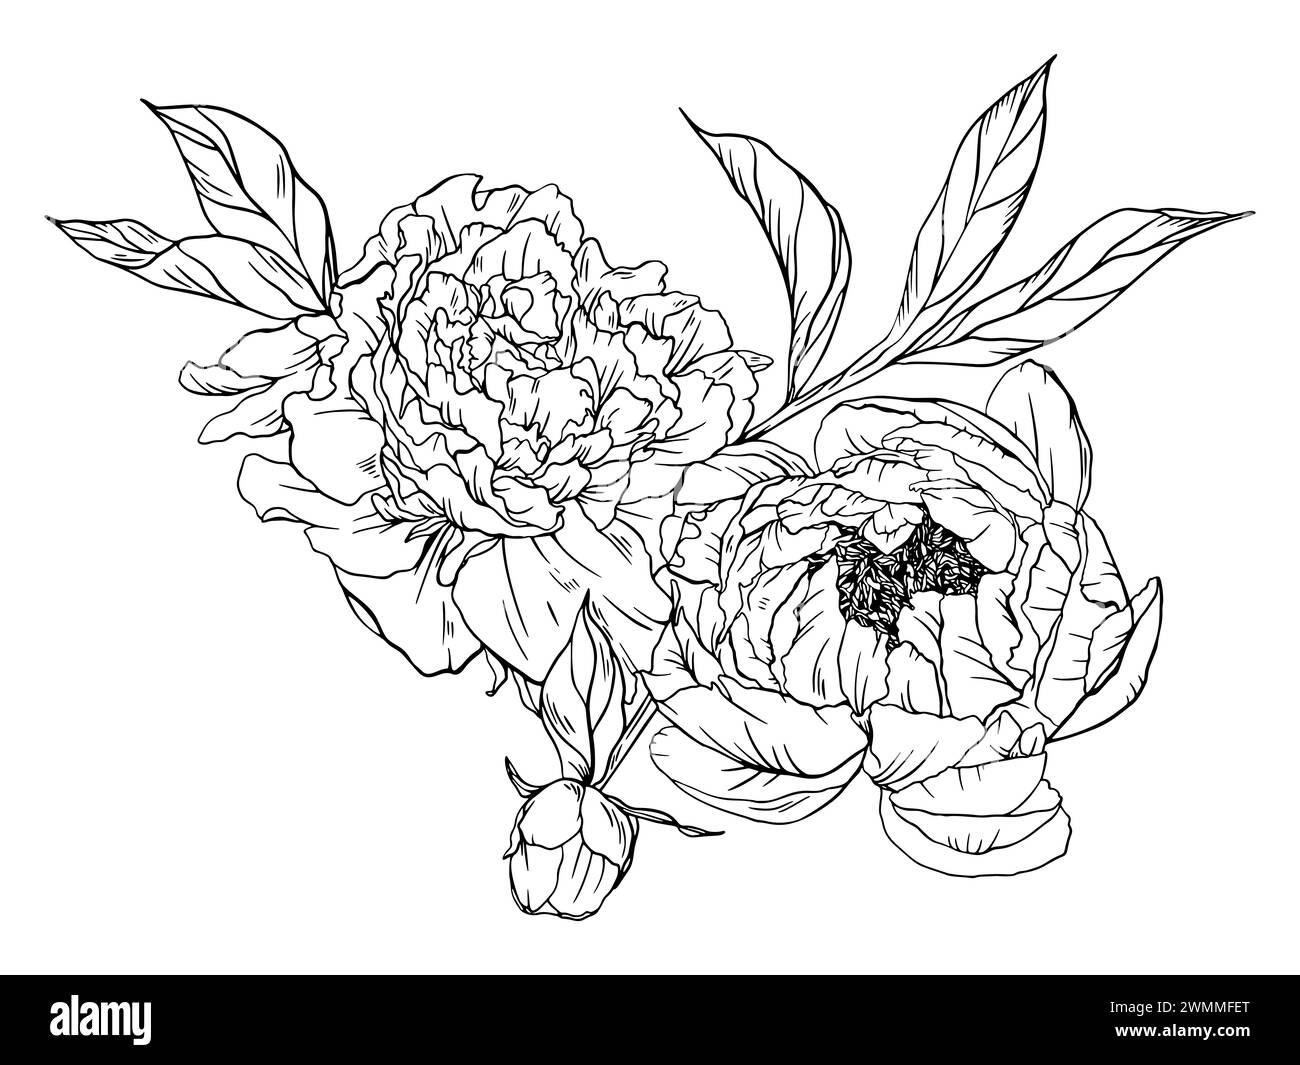 Sketch Peonies Composition, Hand Drawn Illustration of Peony, Leaves and Bud White Background Stock Photo